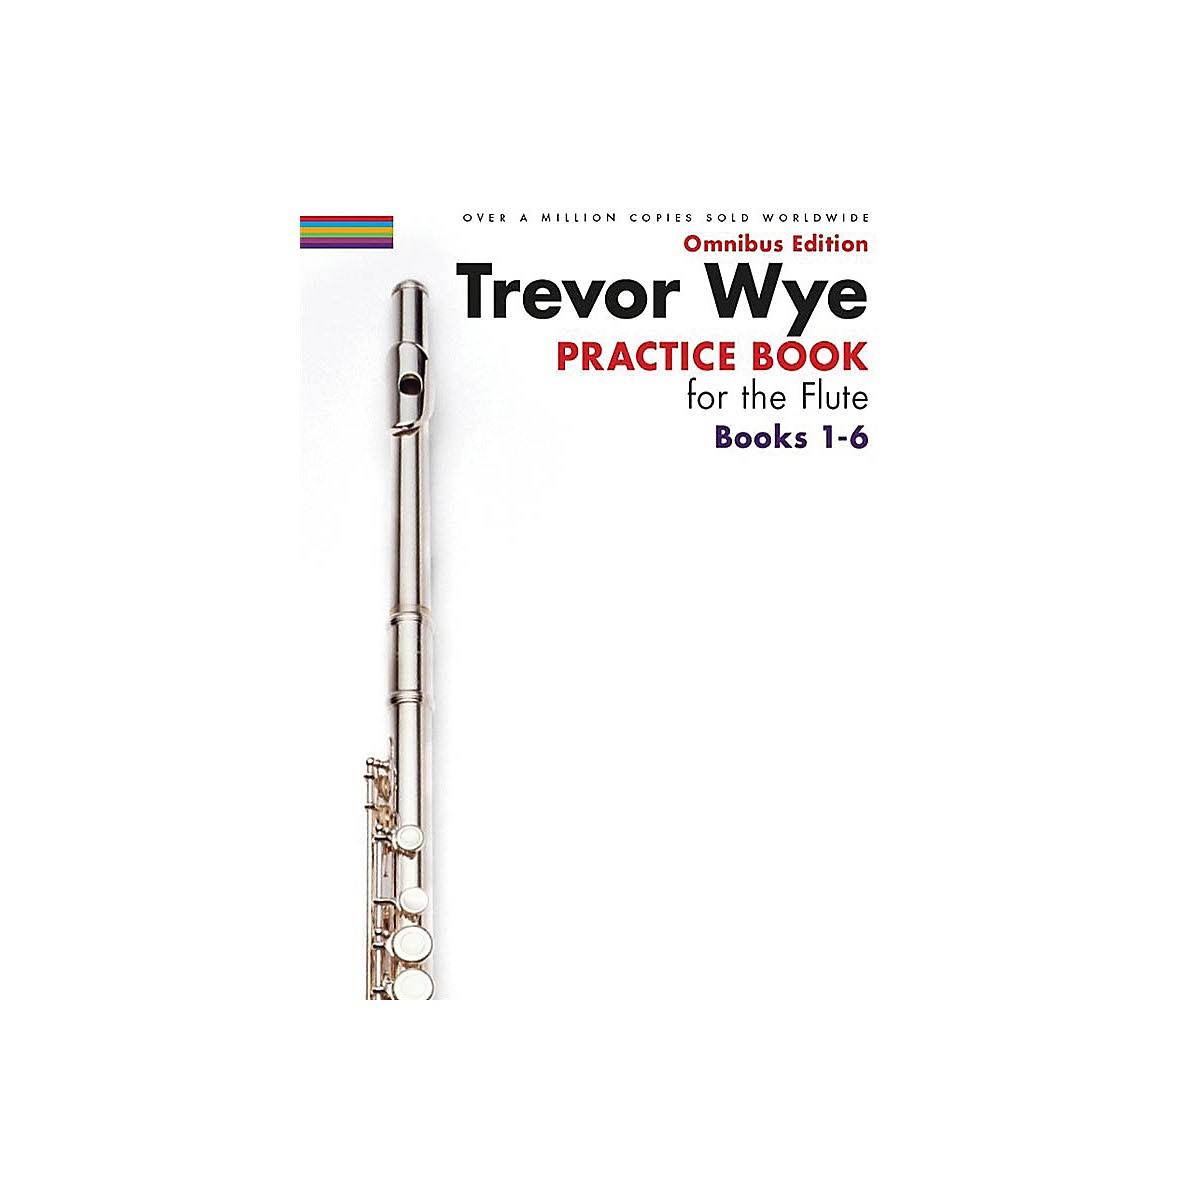 Trevor Wye - Practice Book For The Flute - Omnibus Edition Books 1-6 by Trevor Wye - Sheet Music